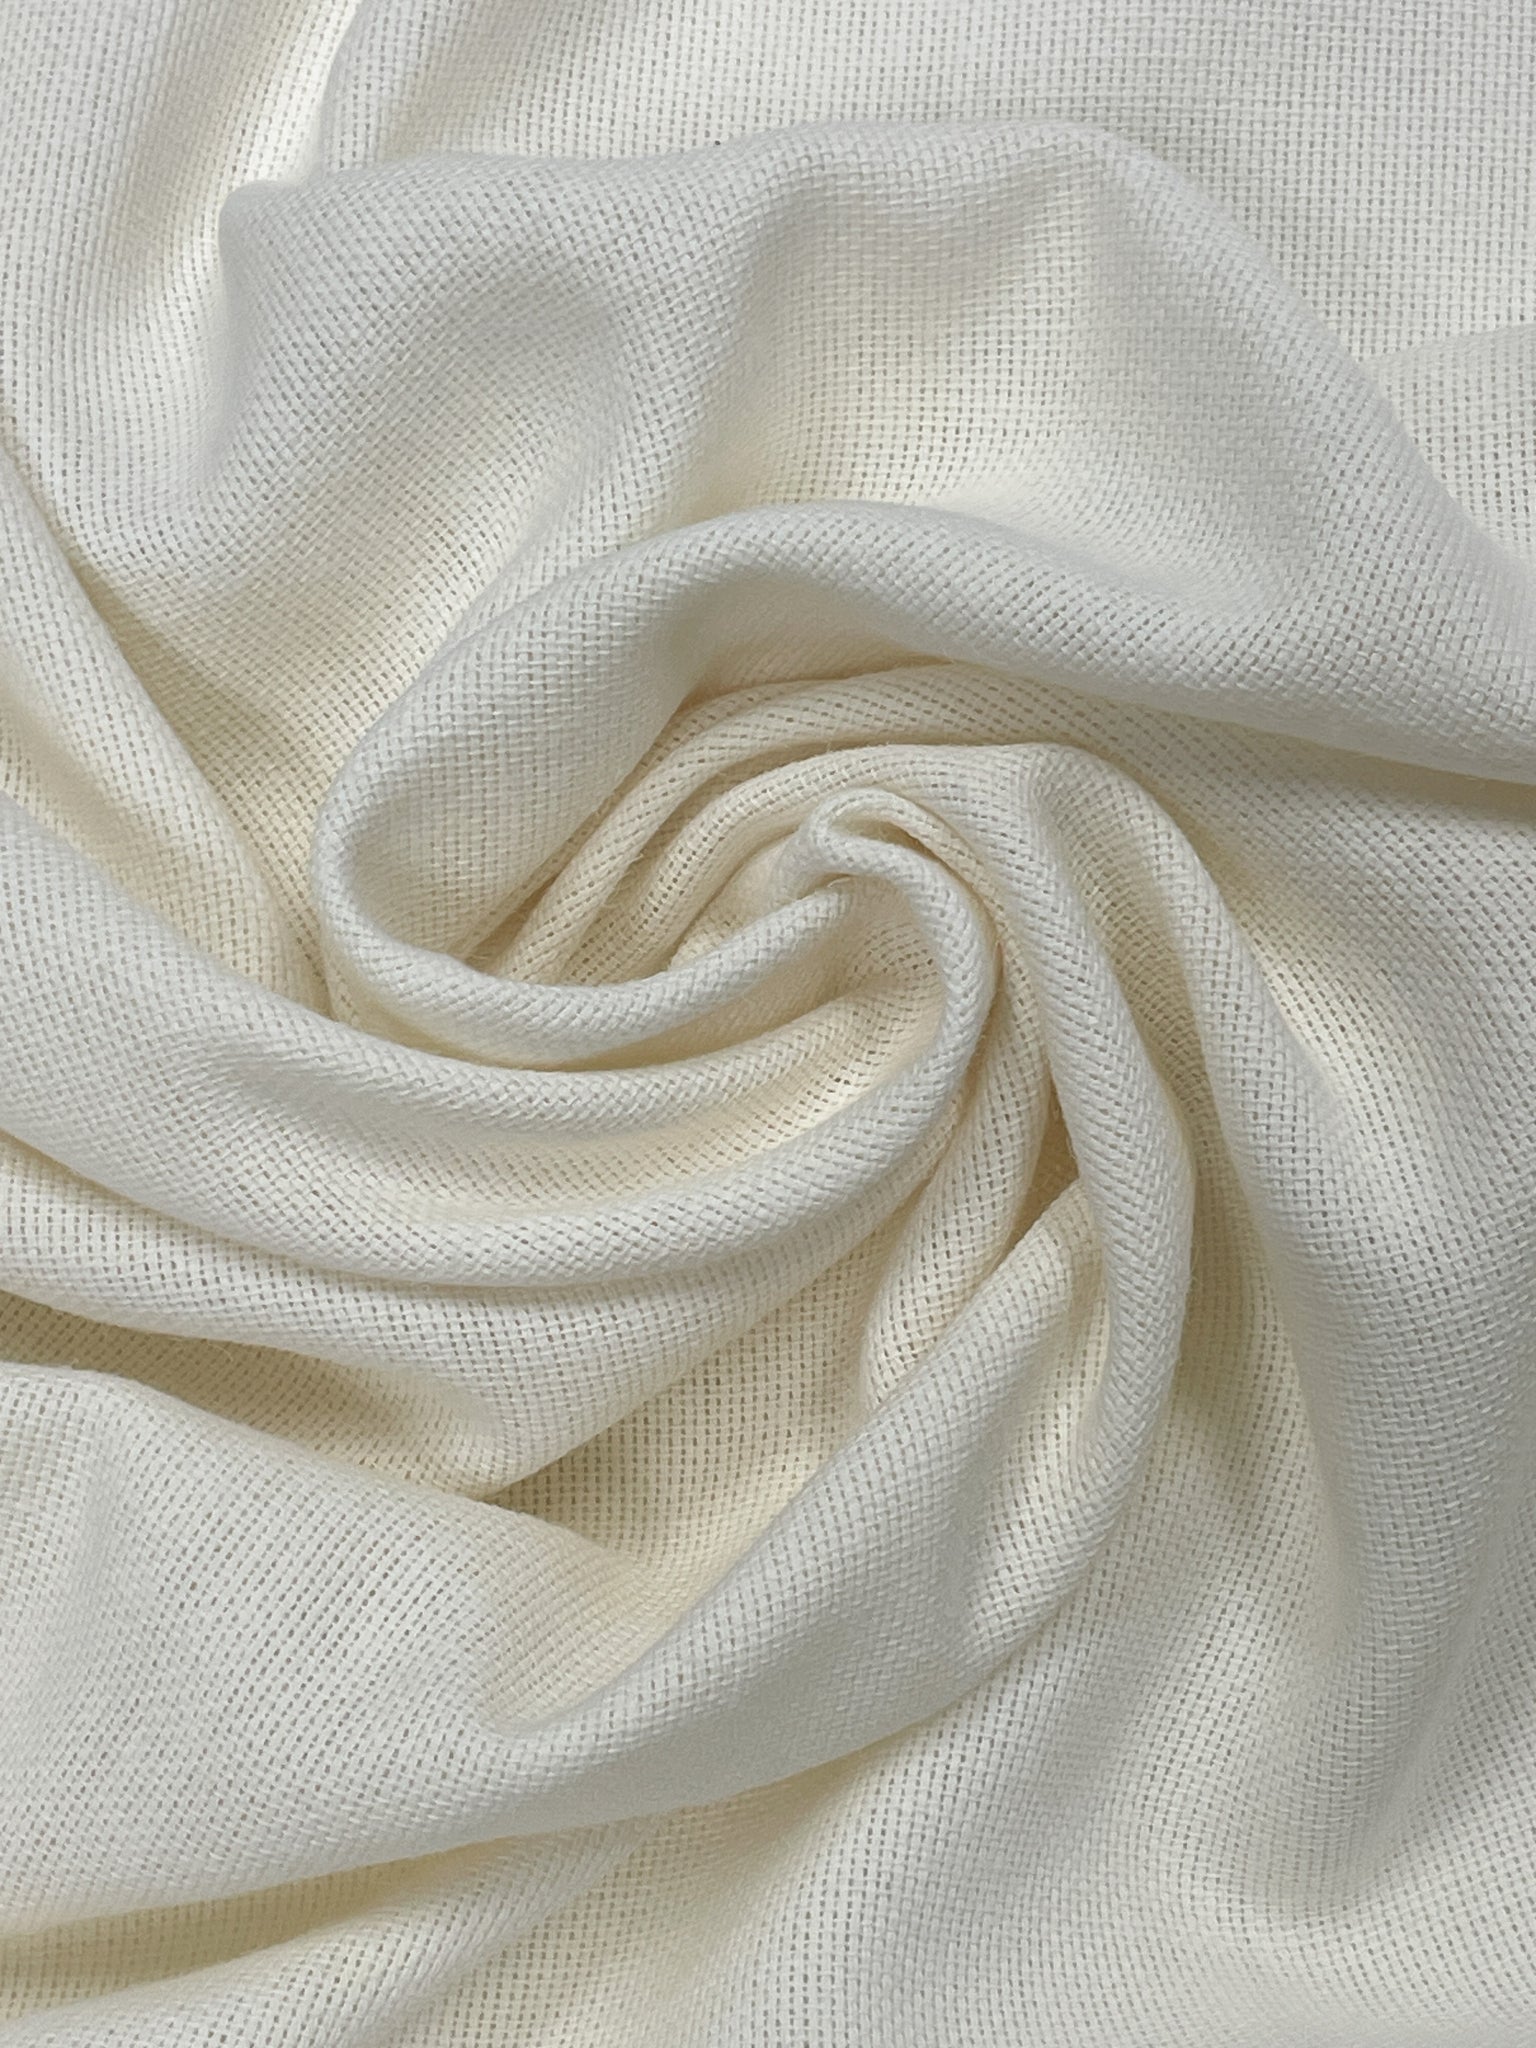 Wool Blend Loose Weave - Off White